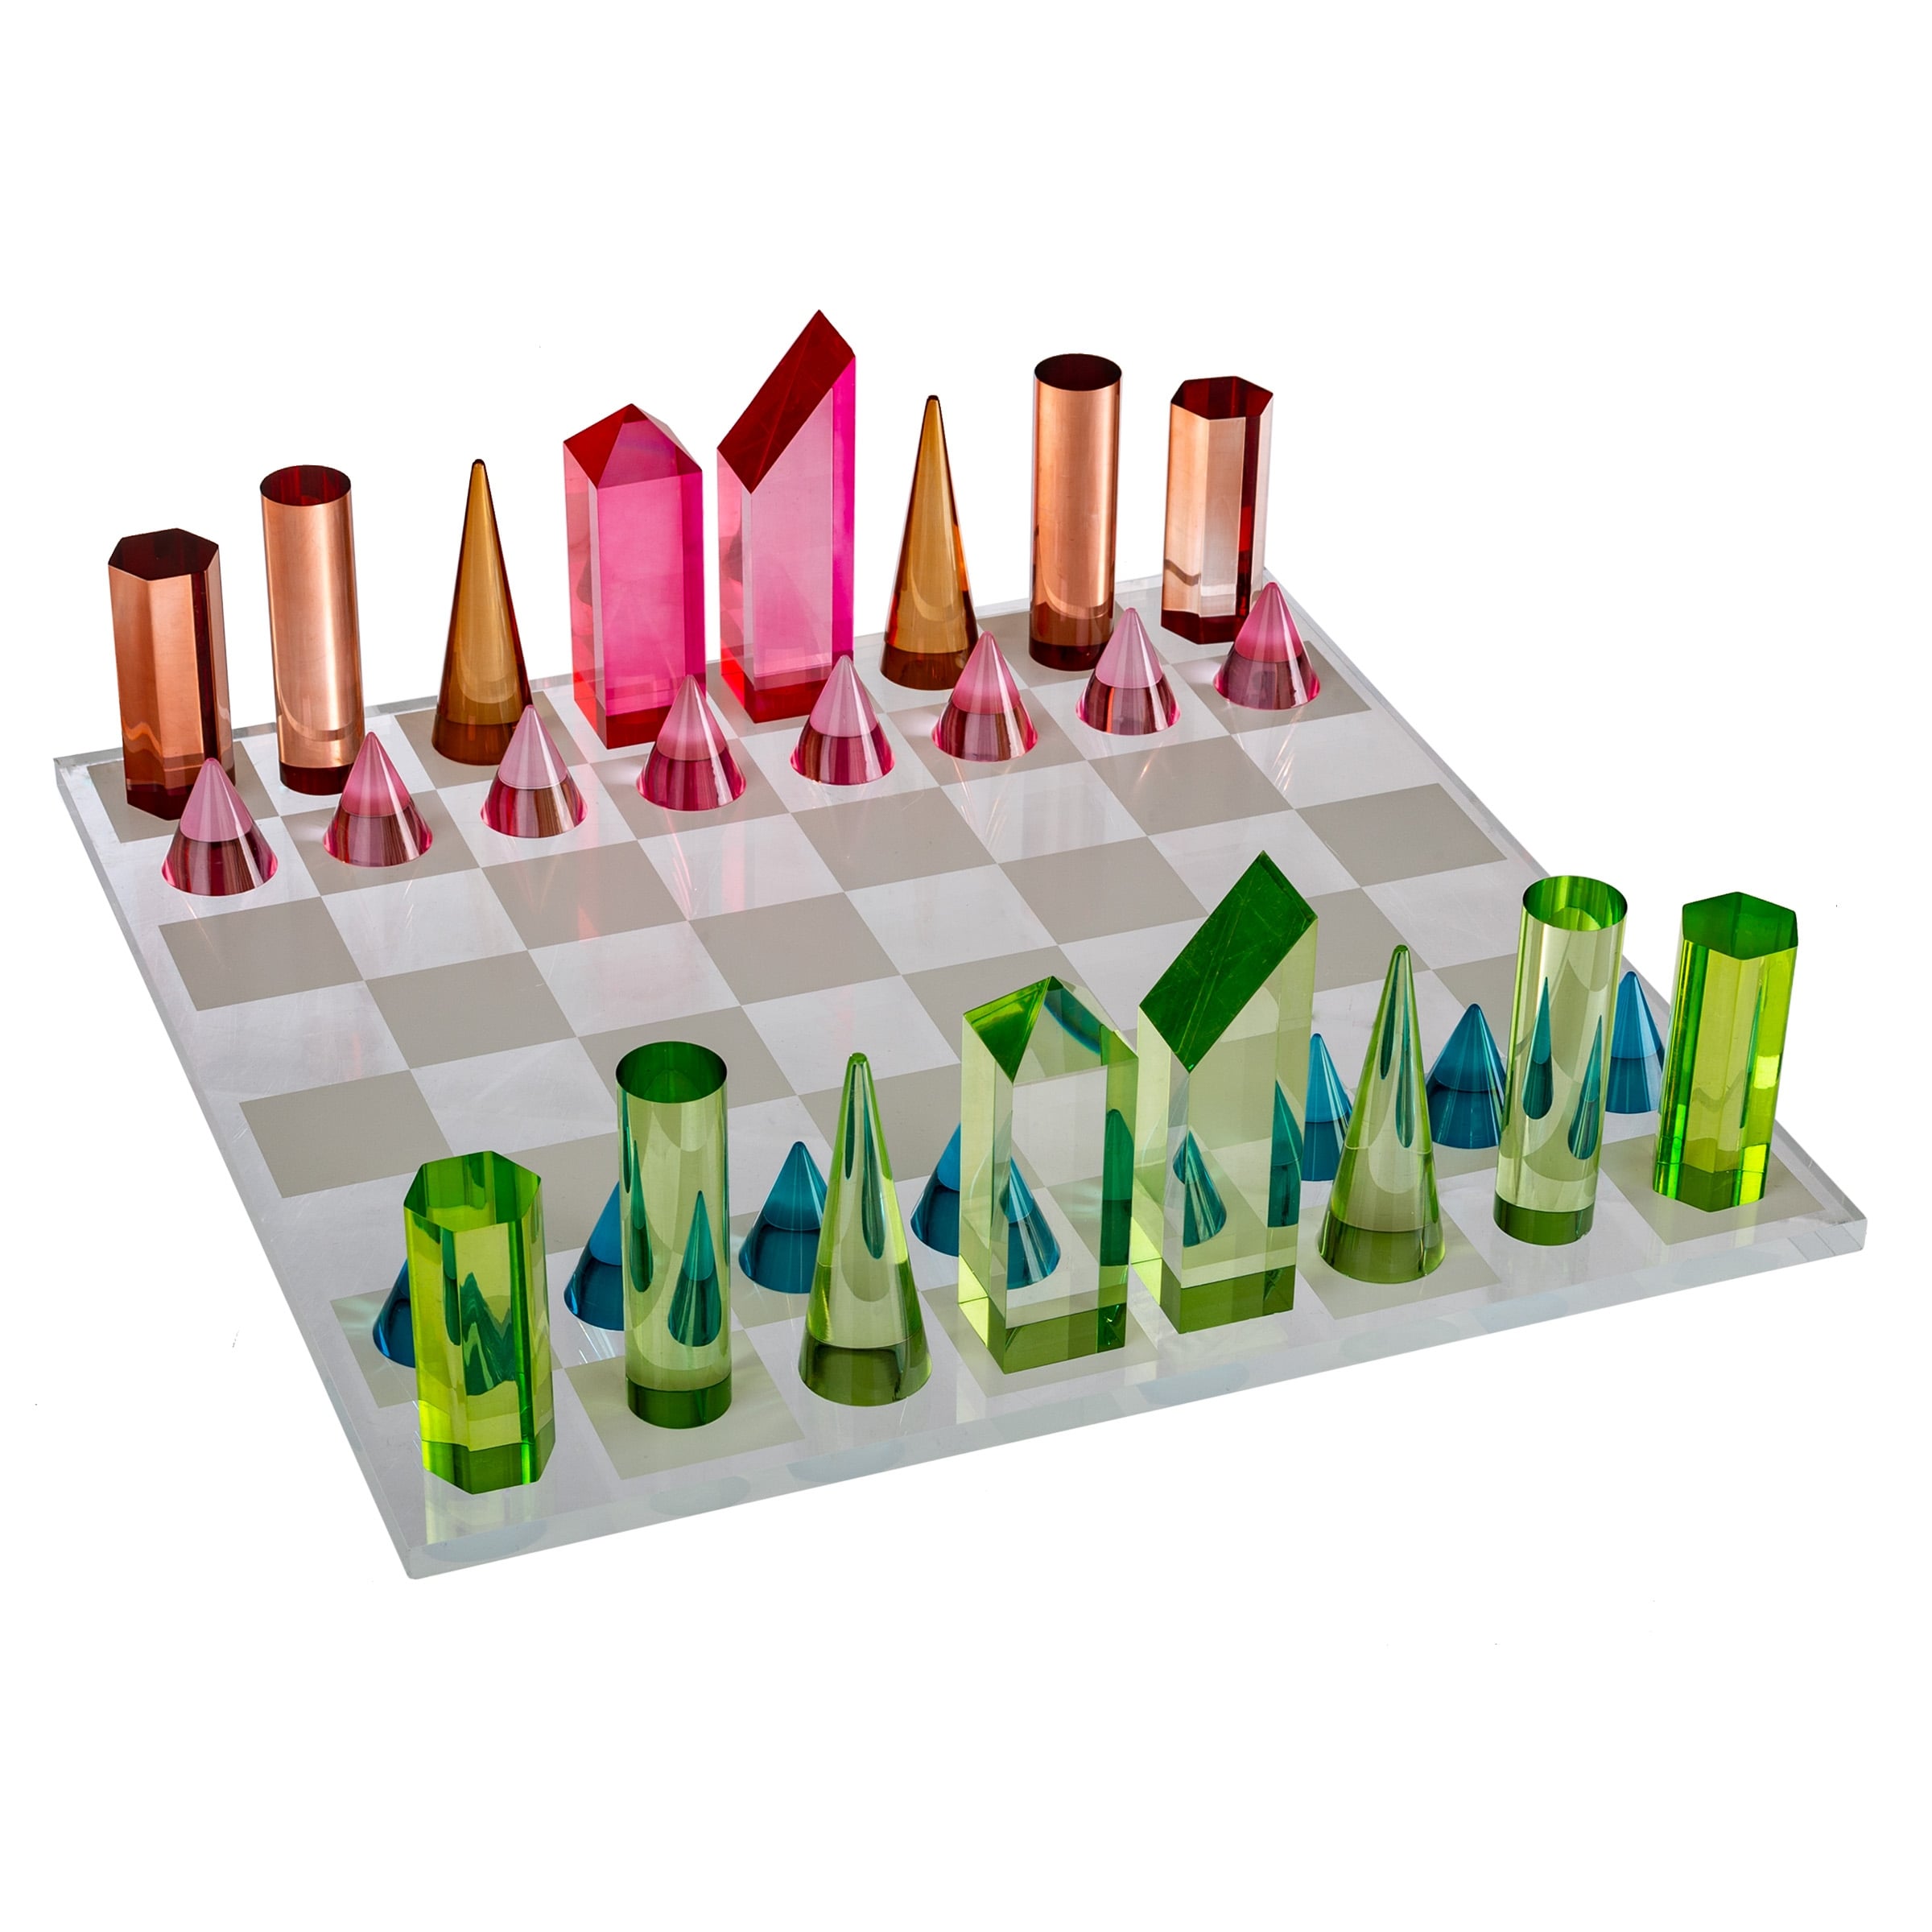 Modern Chess Set - Acrylic Chess Board with 32 Colorful Game Pieces by Trademark Games